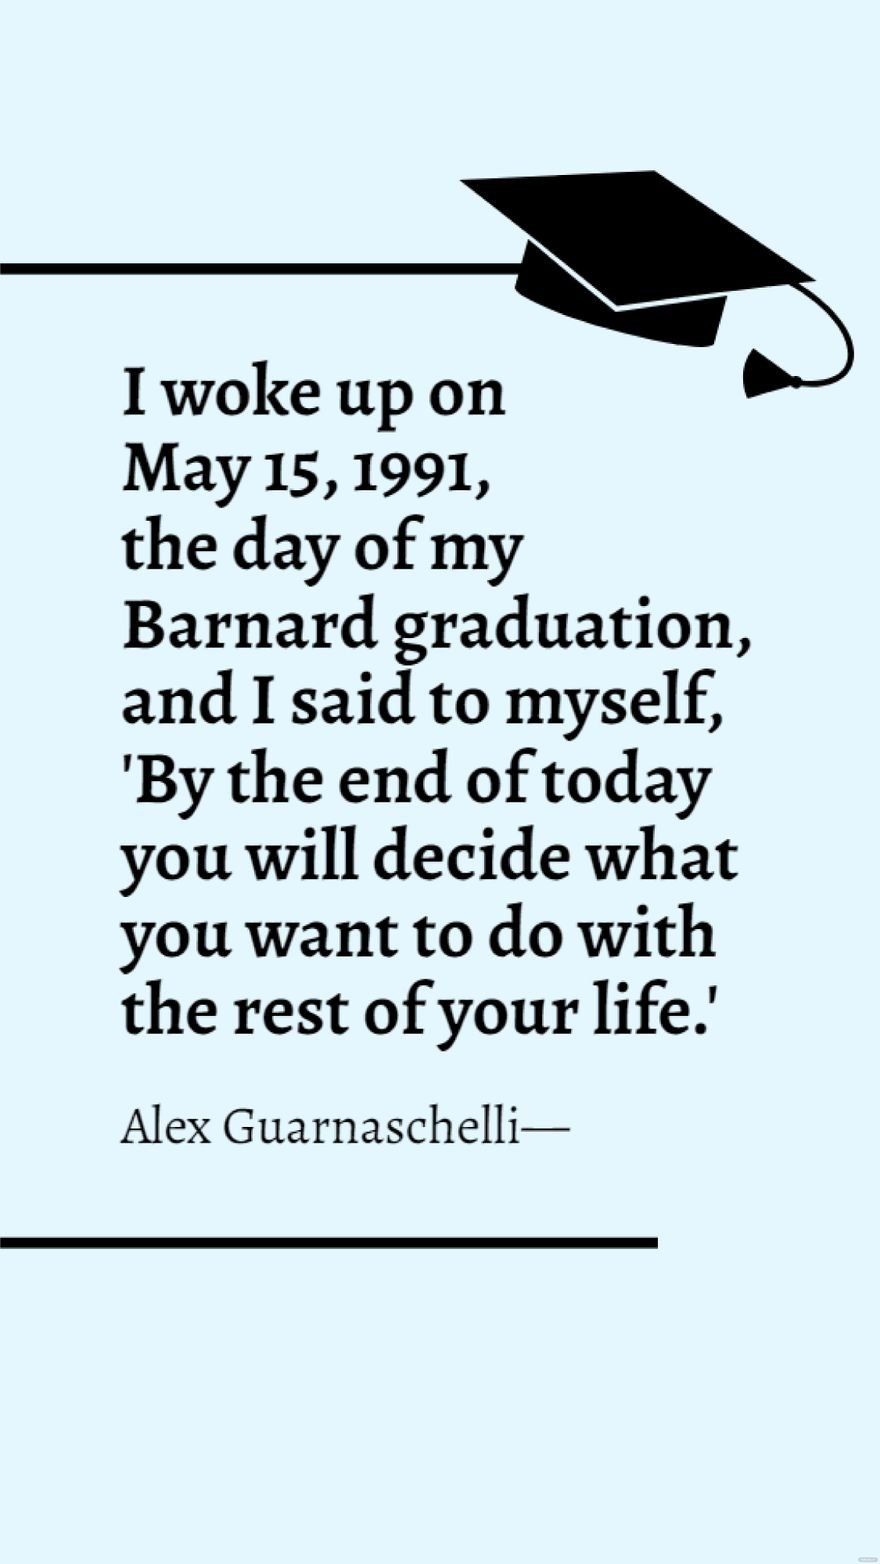 Free Alex Guarnaschelli - I woke up on May 15, 1991, the day of my Barnard graduation, and I said to myself, 'By the end of today you will decide what you want to do with the rest of your life.'